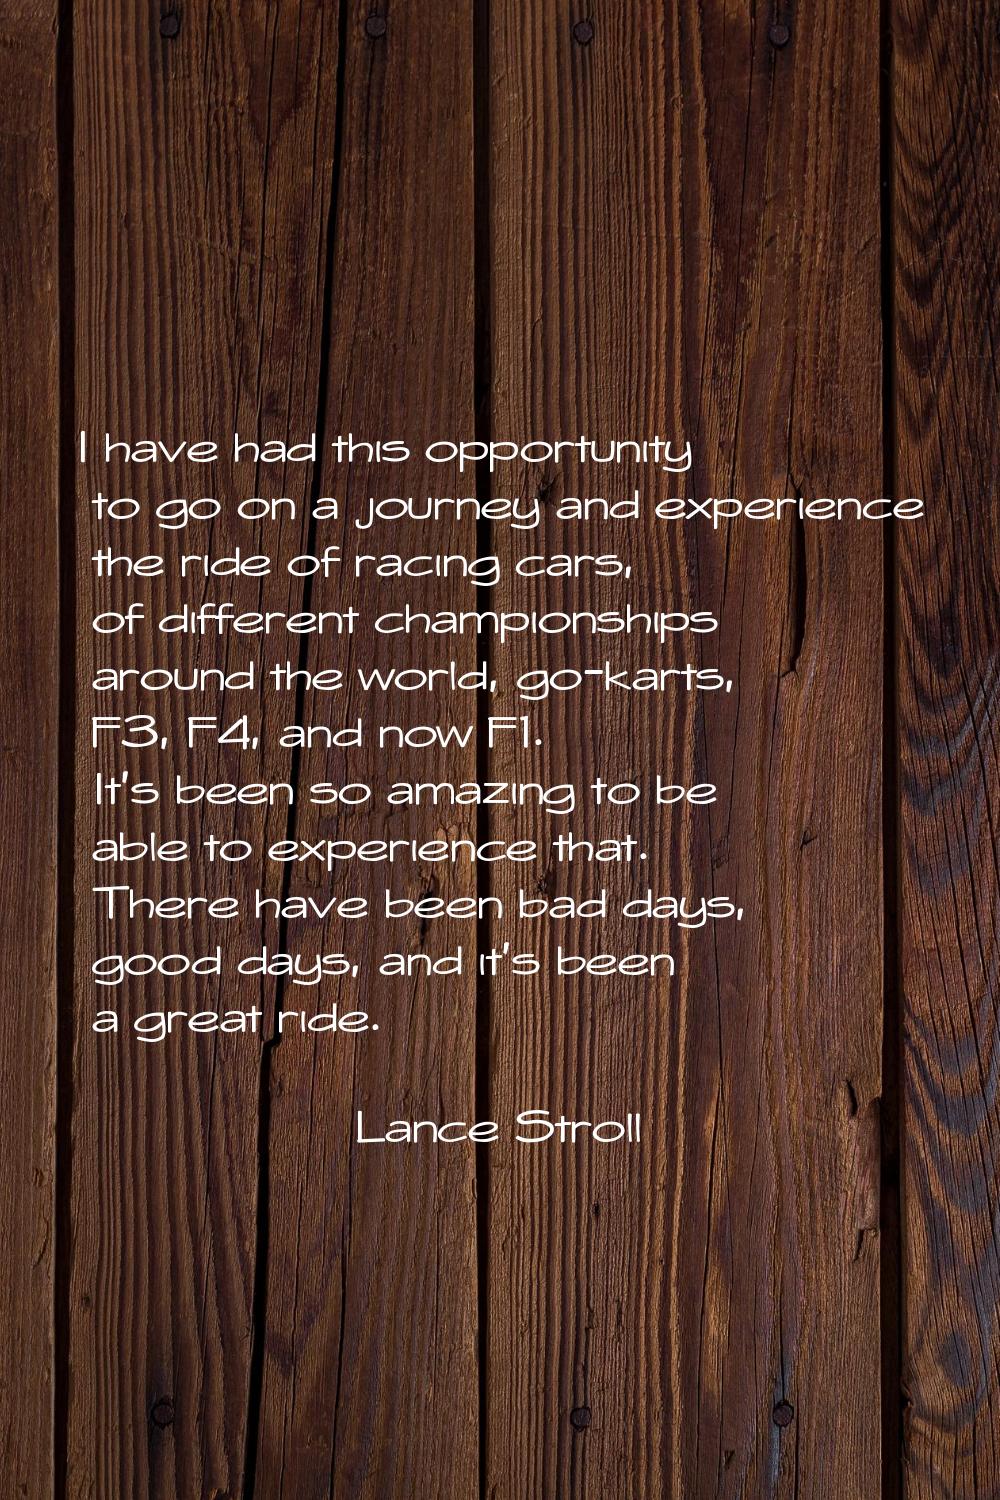 I have had this opportunity to go on a journey and experience the ride of racing cars, of different